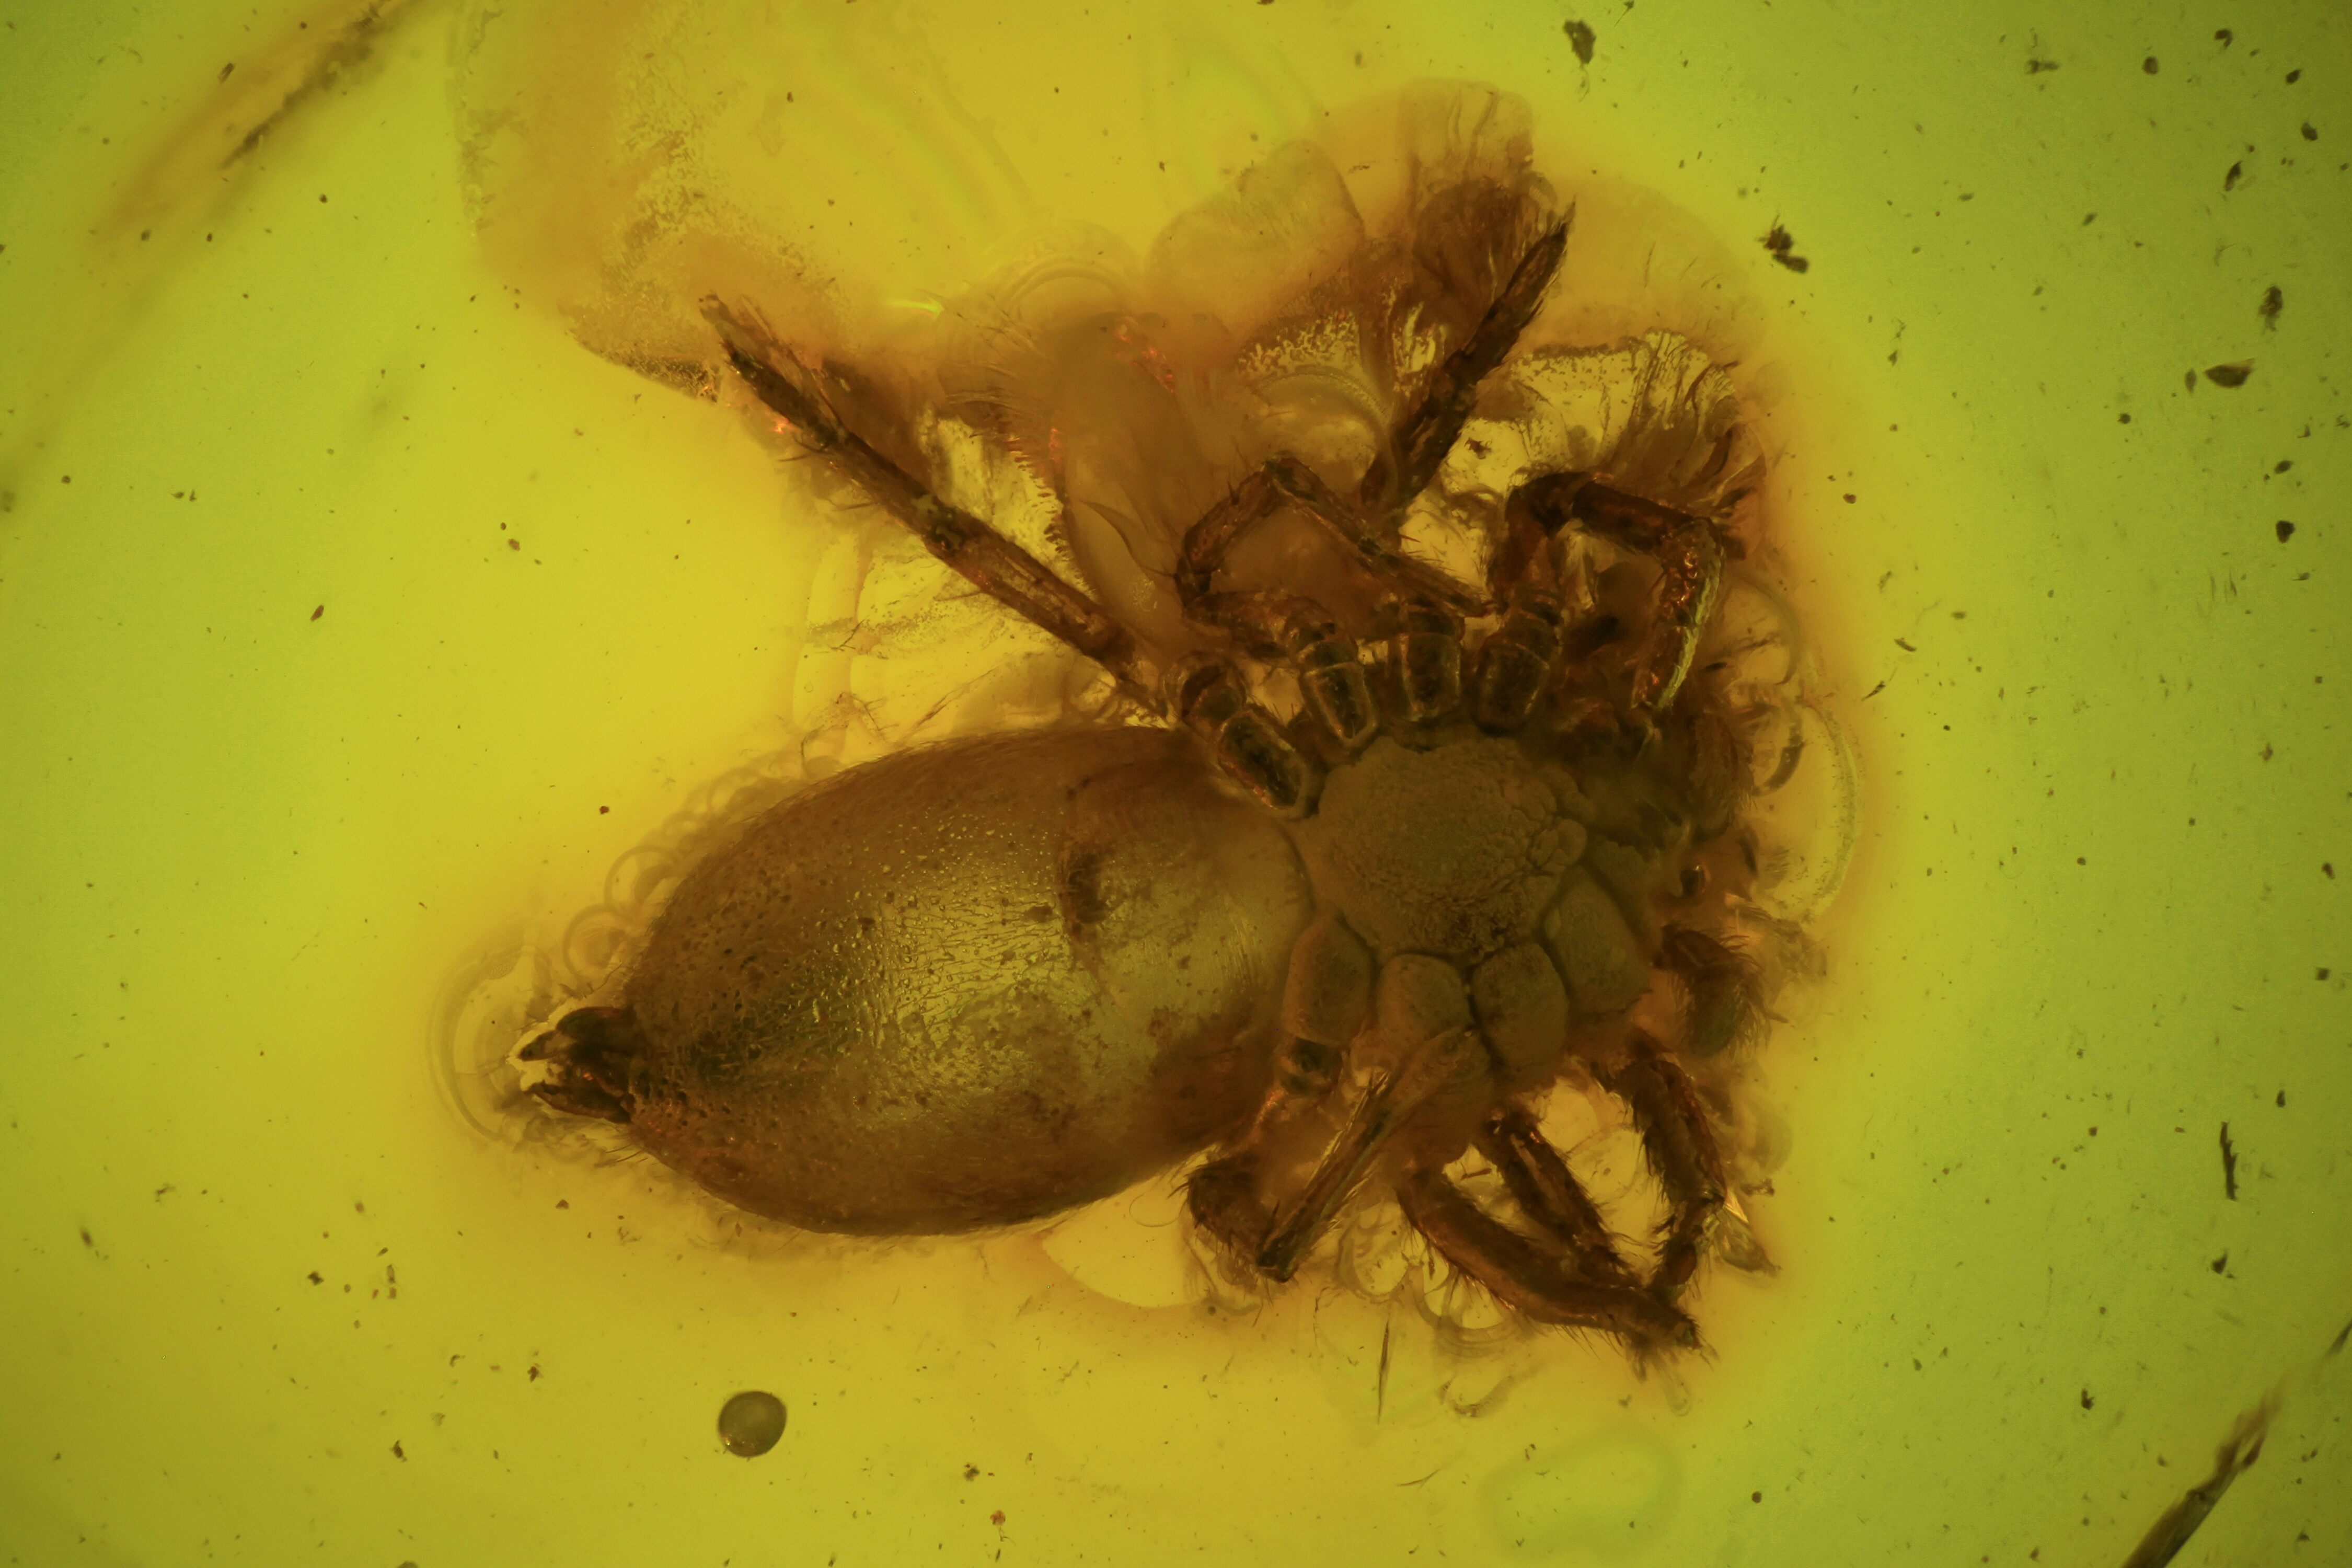 Running air in water bubble, Spider Araneae and More. Fossil inclusion in  Ukrainian Rovno amber #10952R